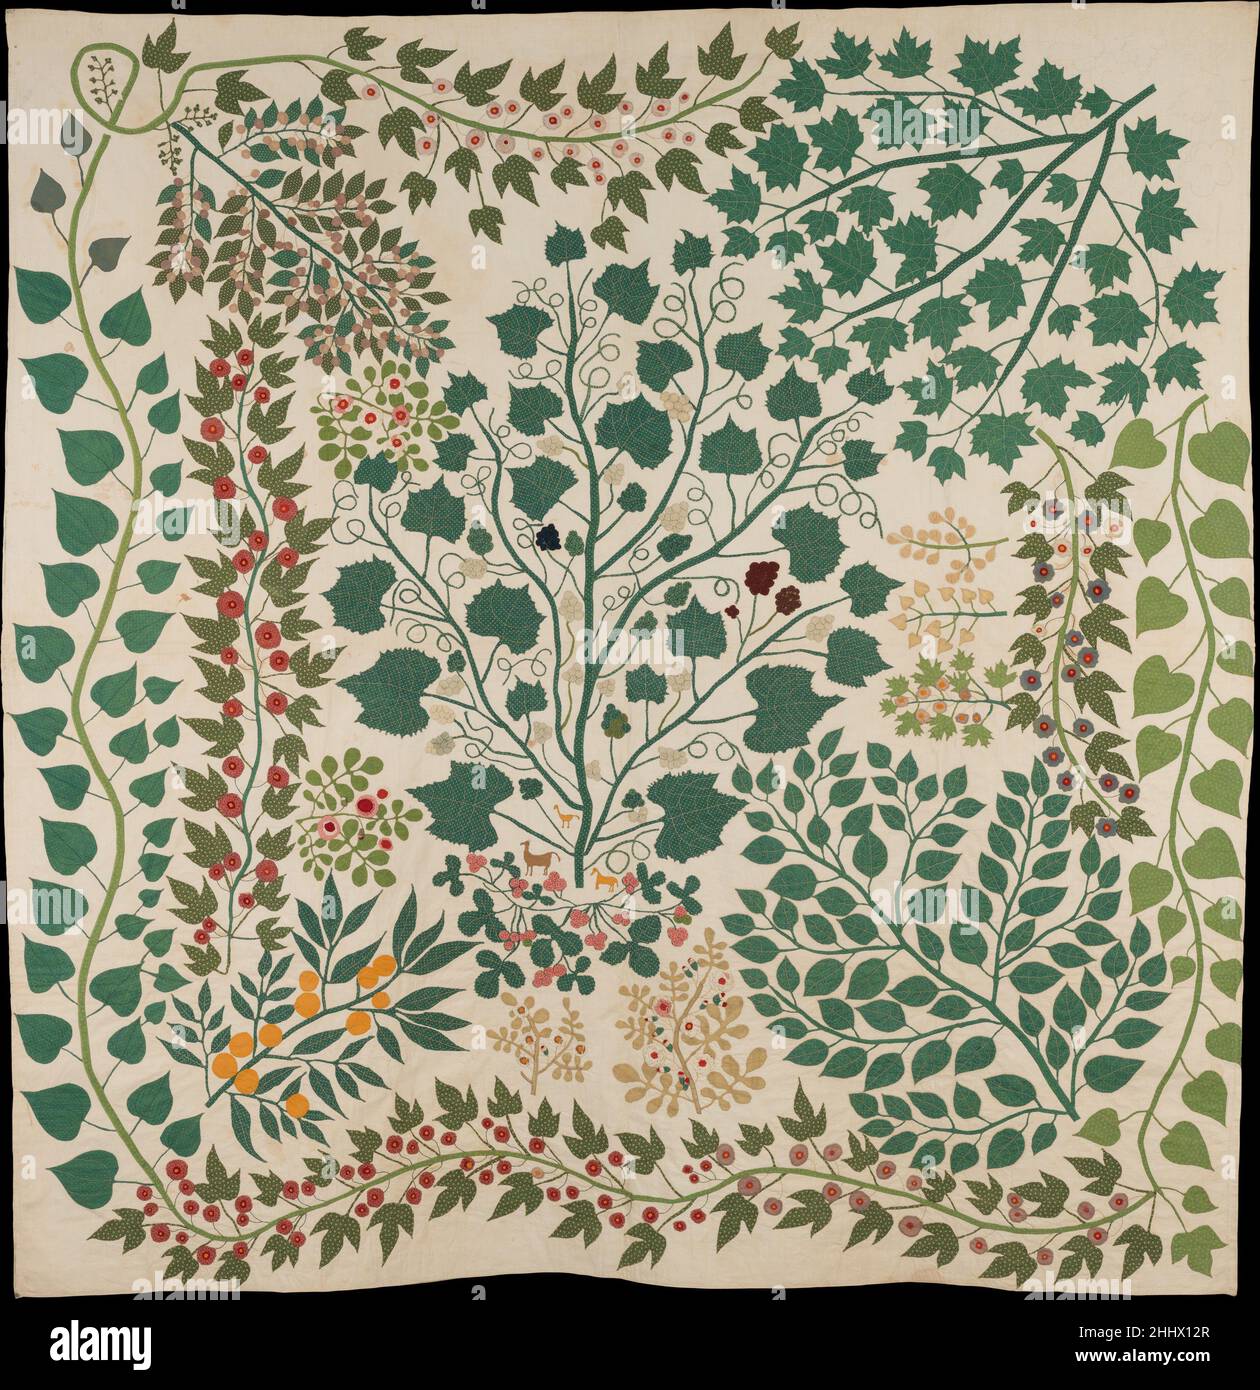 Branches and Vines Quilt ca. 1875 Ernestine Eberhardt Zaumseil American Working in the later years of the nineteenth century, Ernestine Zaumseil created this extraordinary quilt employing the Tree of Life pattern, a design that has been popular for use on bedcovers since the seventeenth century. The first Tree of Life bedcovers, called “palampores”, were of Indian origin and featured a stylized tree bearing fantastical fruits and flowers. An Indian palampore makes up the central panel of quilt 2014.263 in the American Wing's collection. In Zaumseil’s quilt, the trees and branches are much more Stock Photo